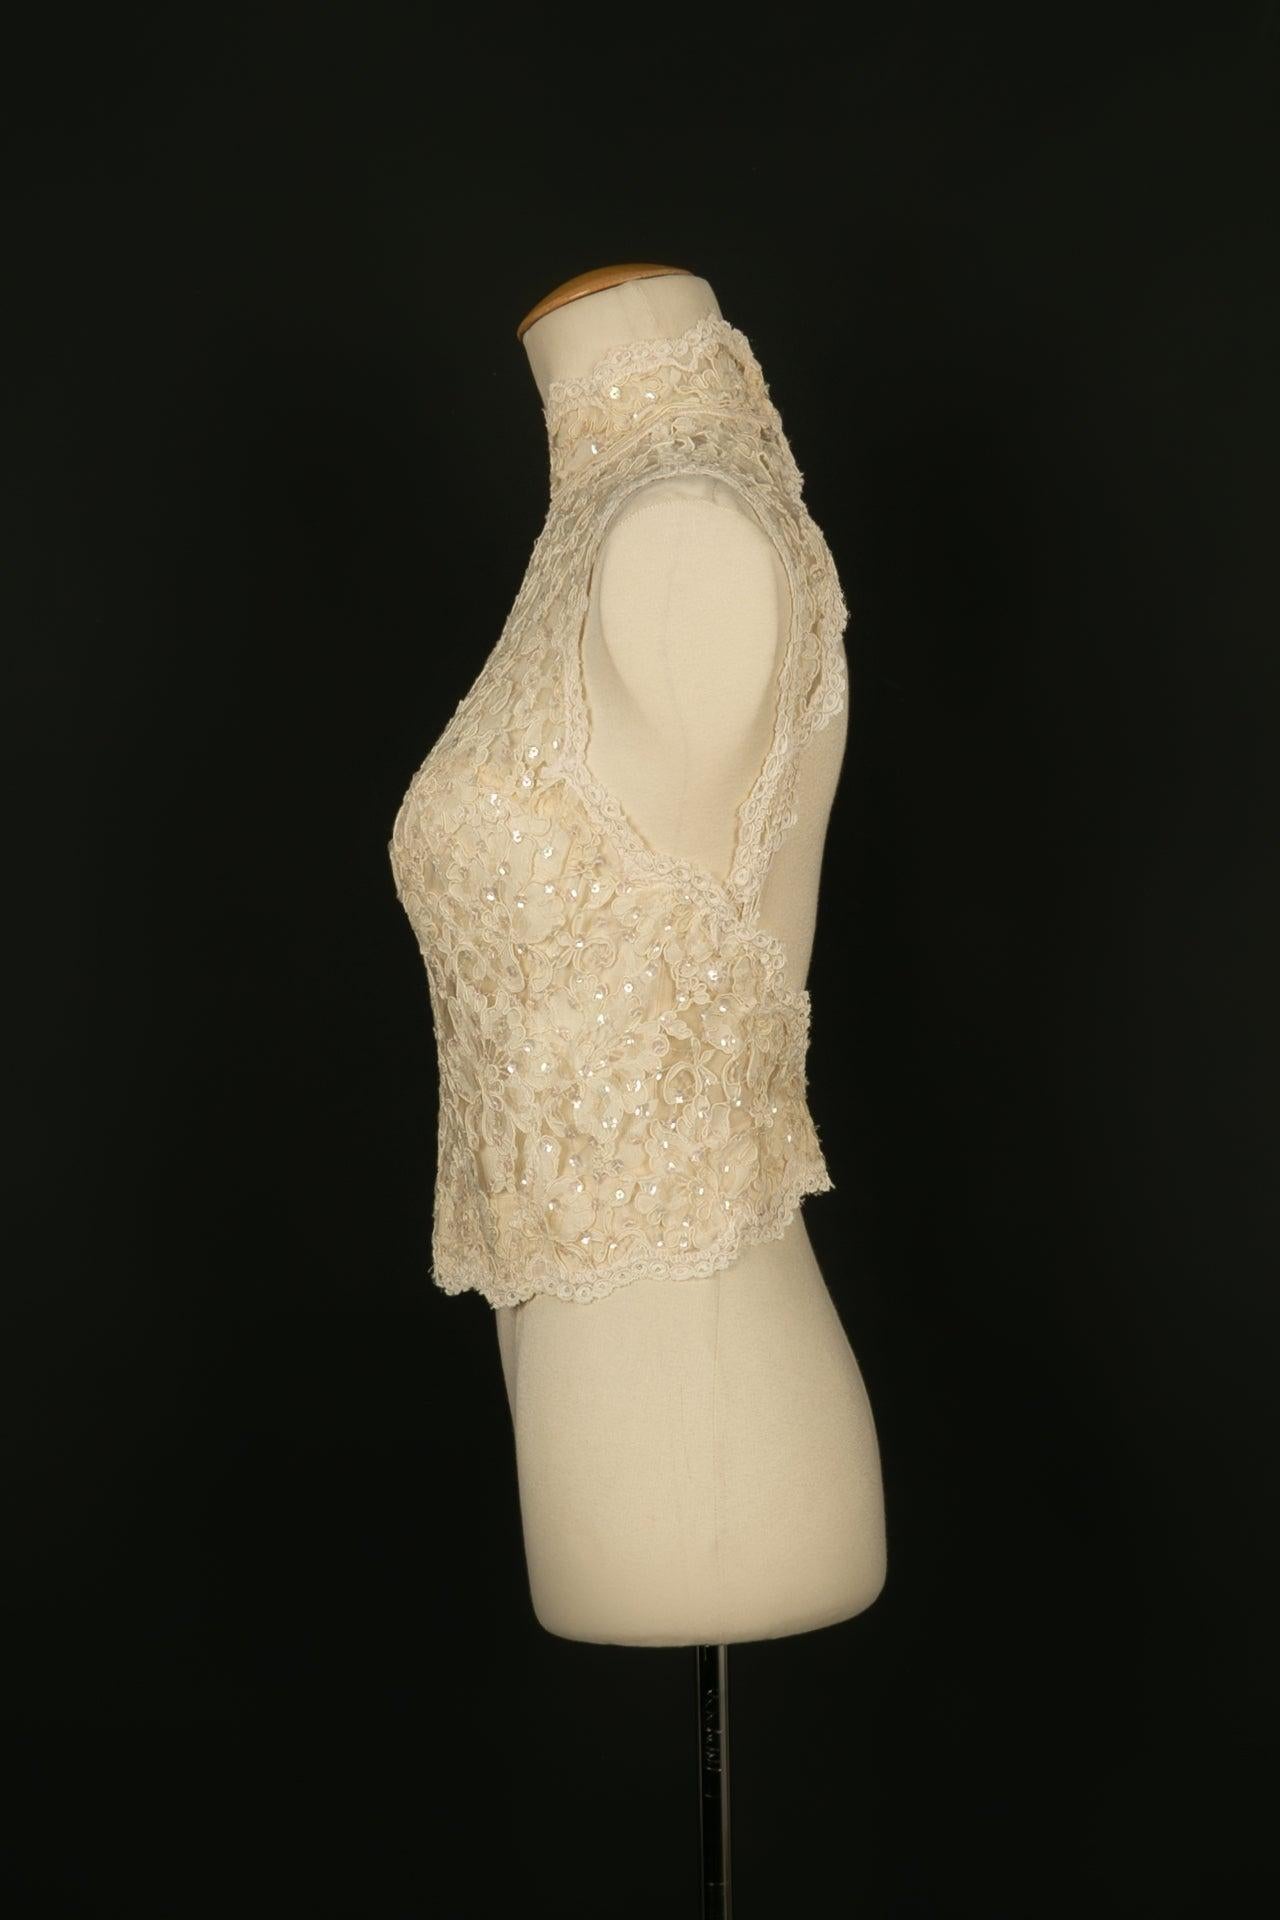 Unknown - Corset in white lace and sequins. No size indicated, it fits a 36FR.

Additional information:
Condition: Very good condition
Dimensions: Chest: 40 cm - Length: 47 cm

Seller Reference: FH174
